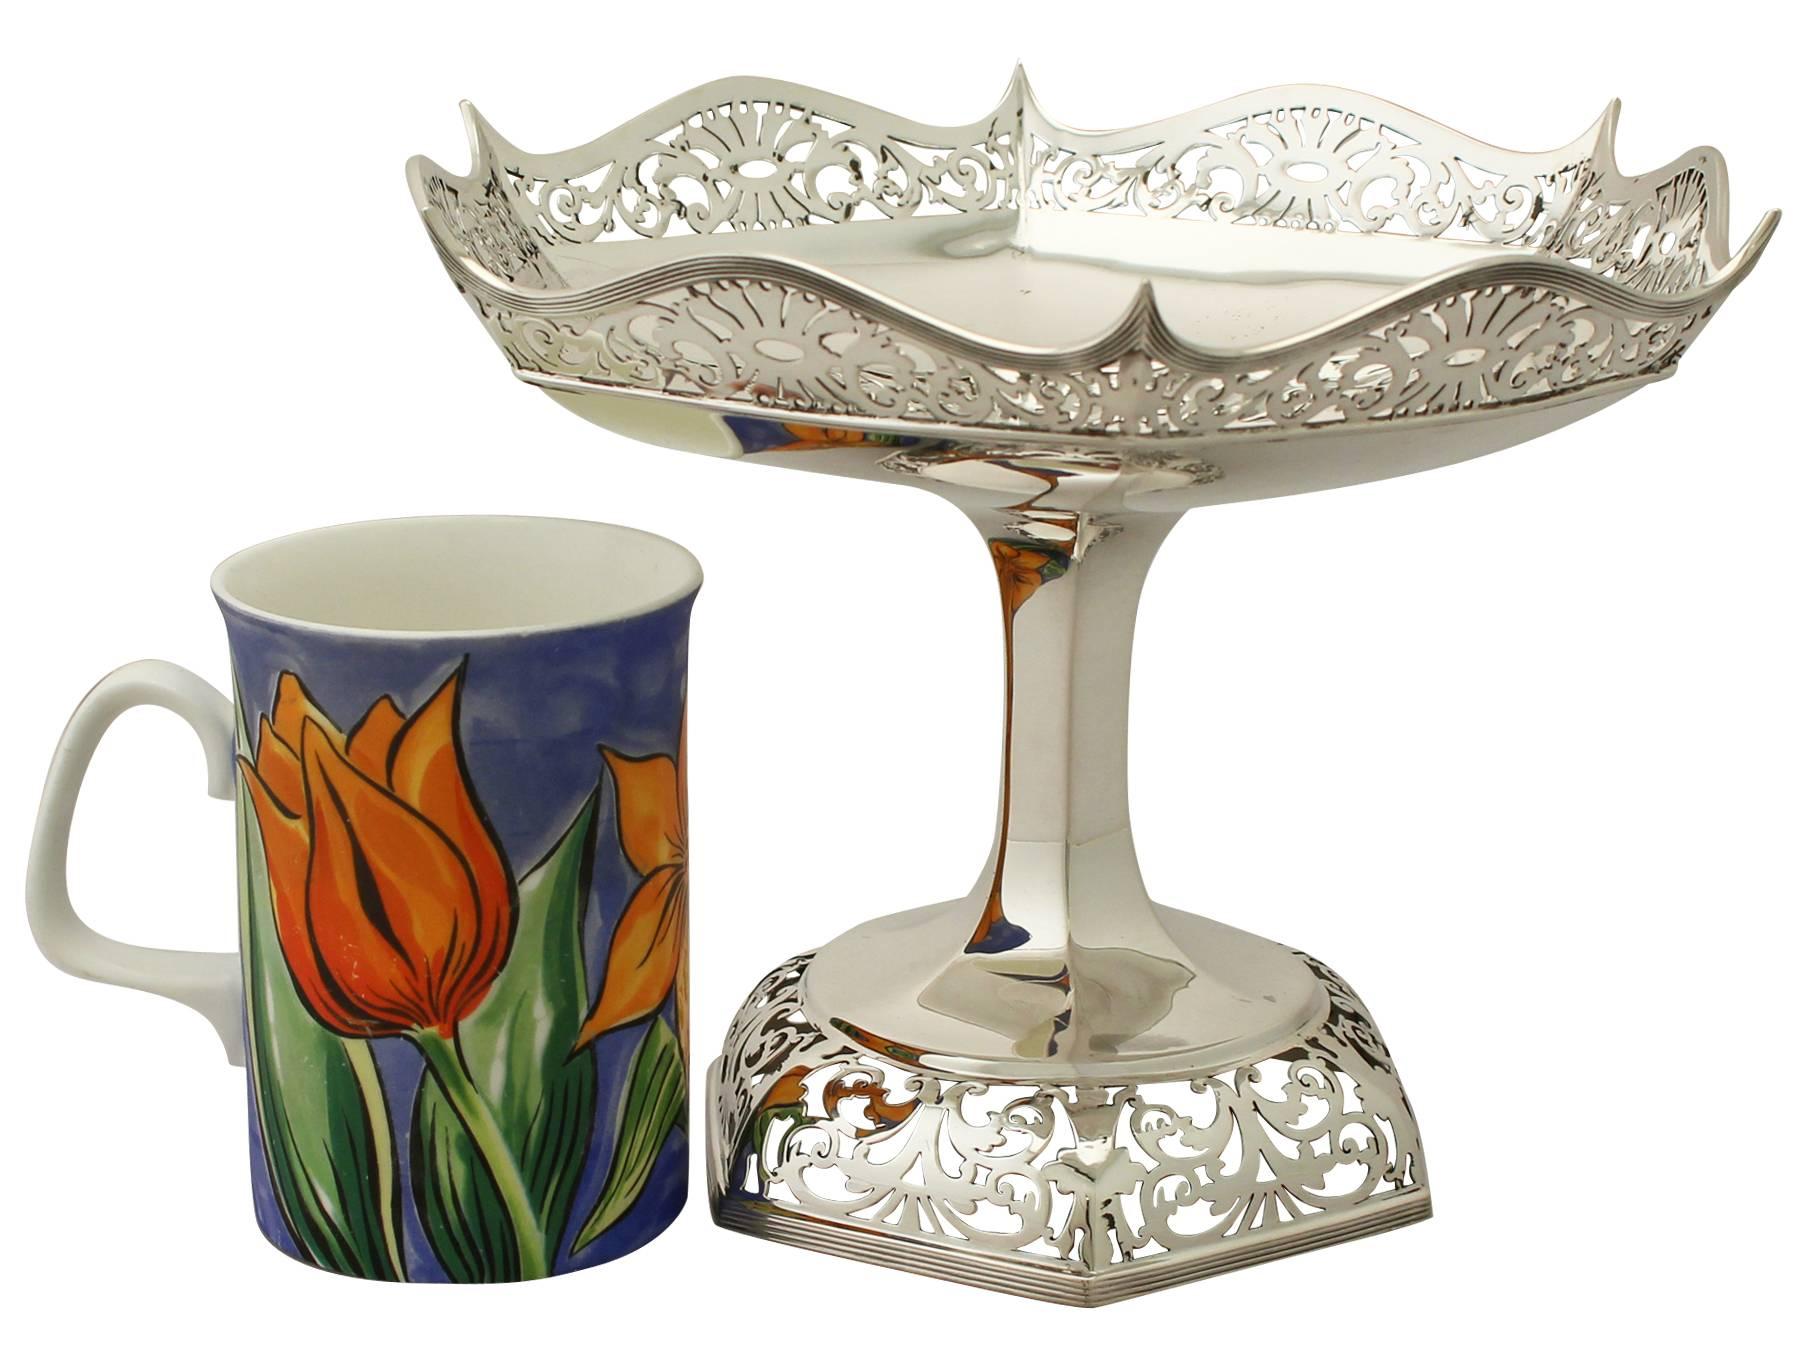 British Edwardian Pair of Sterling Silver Tazza